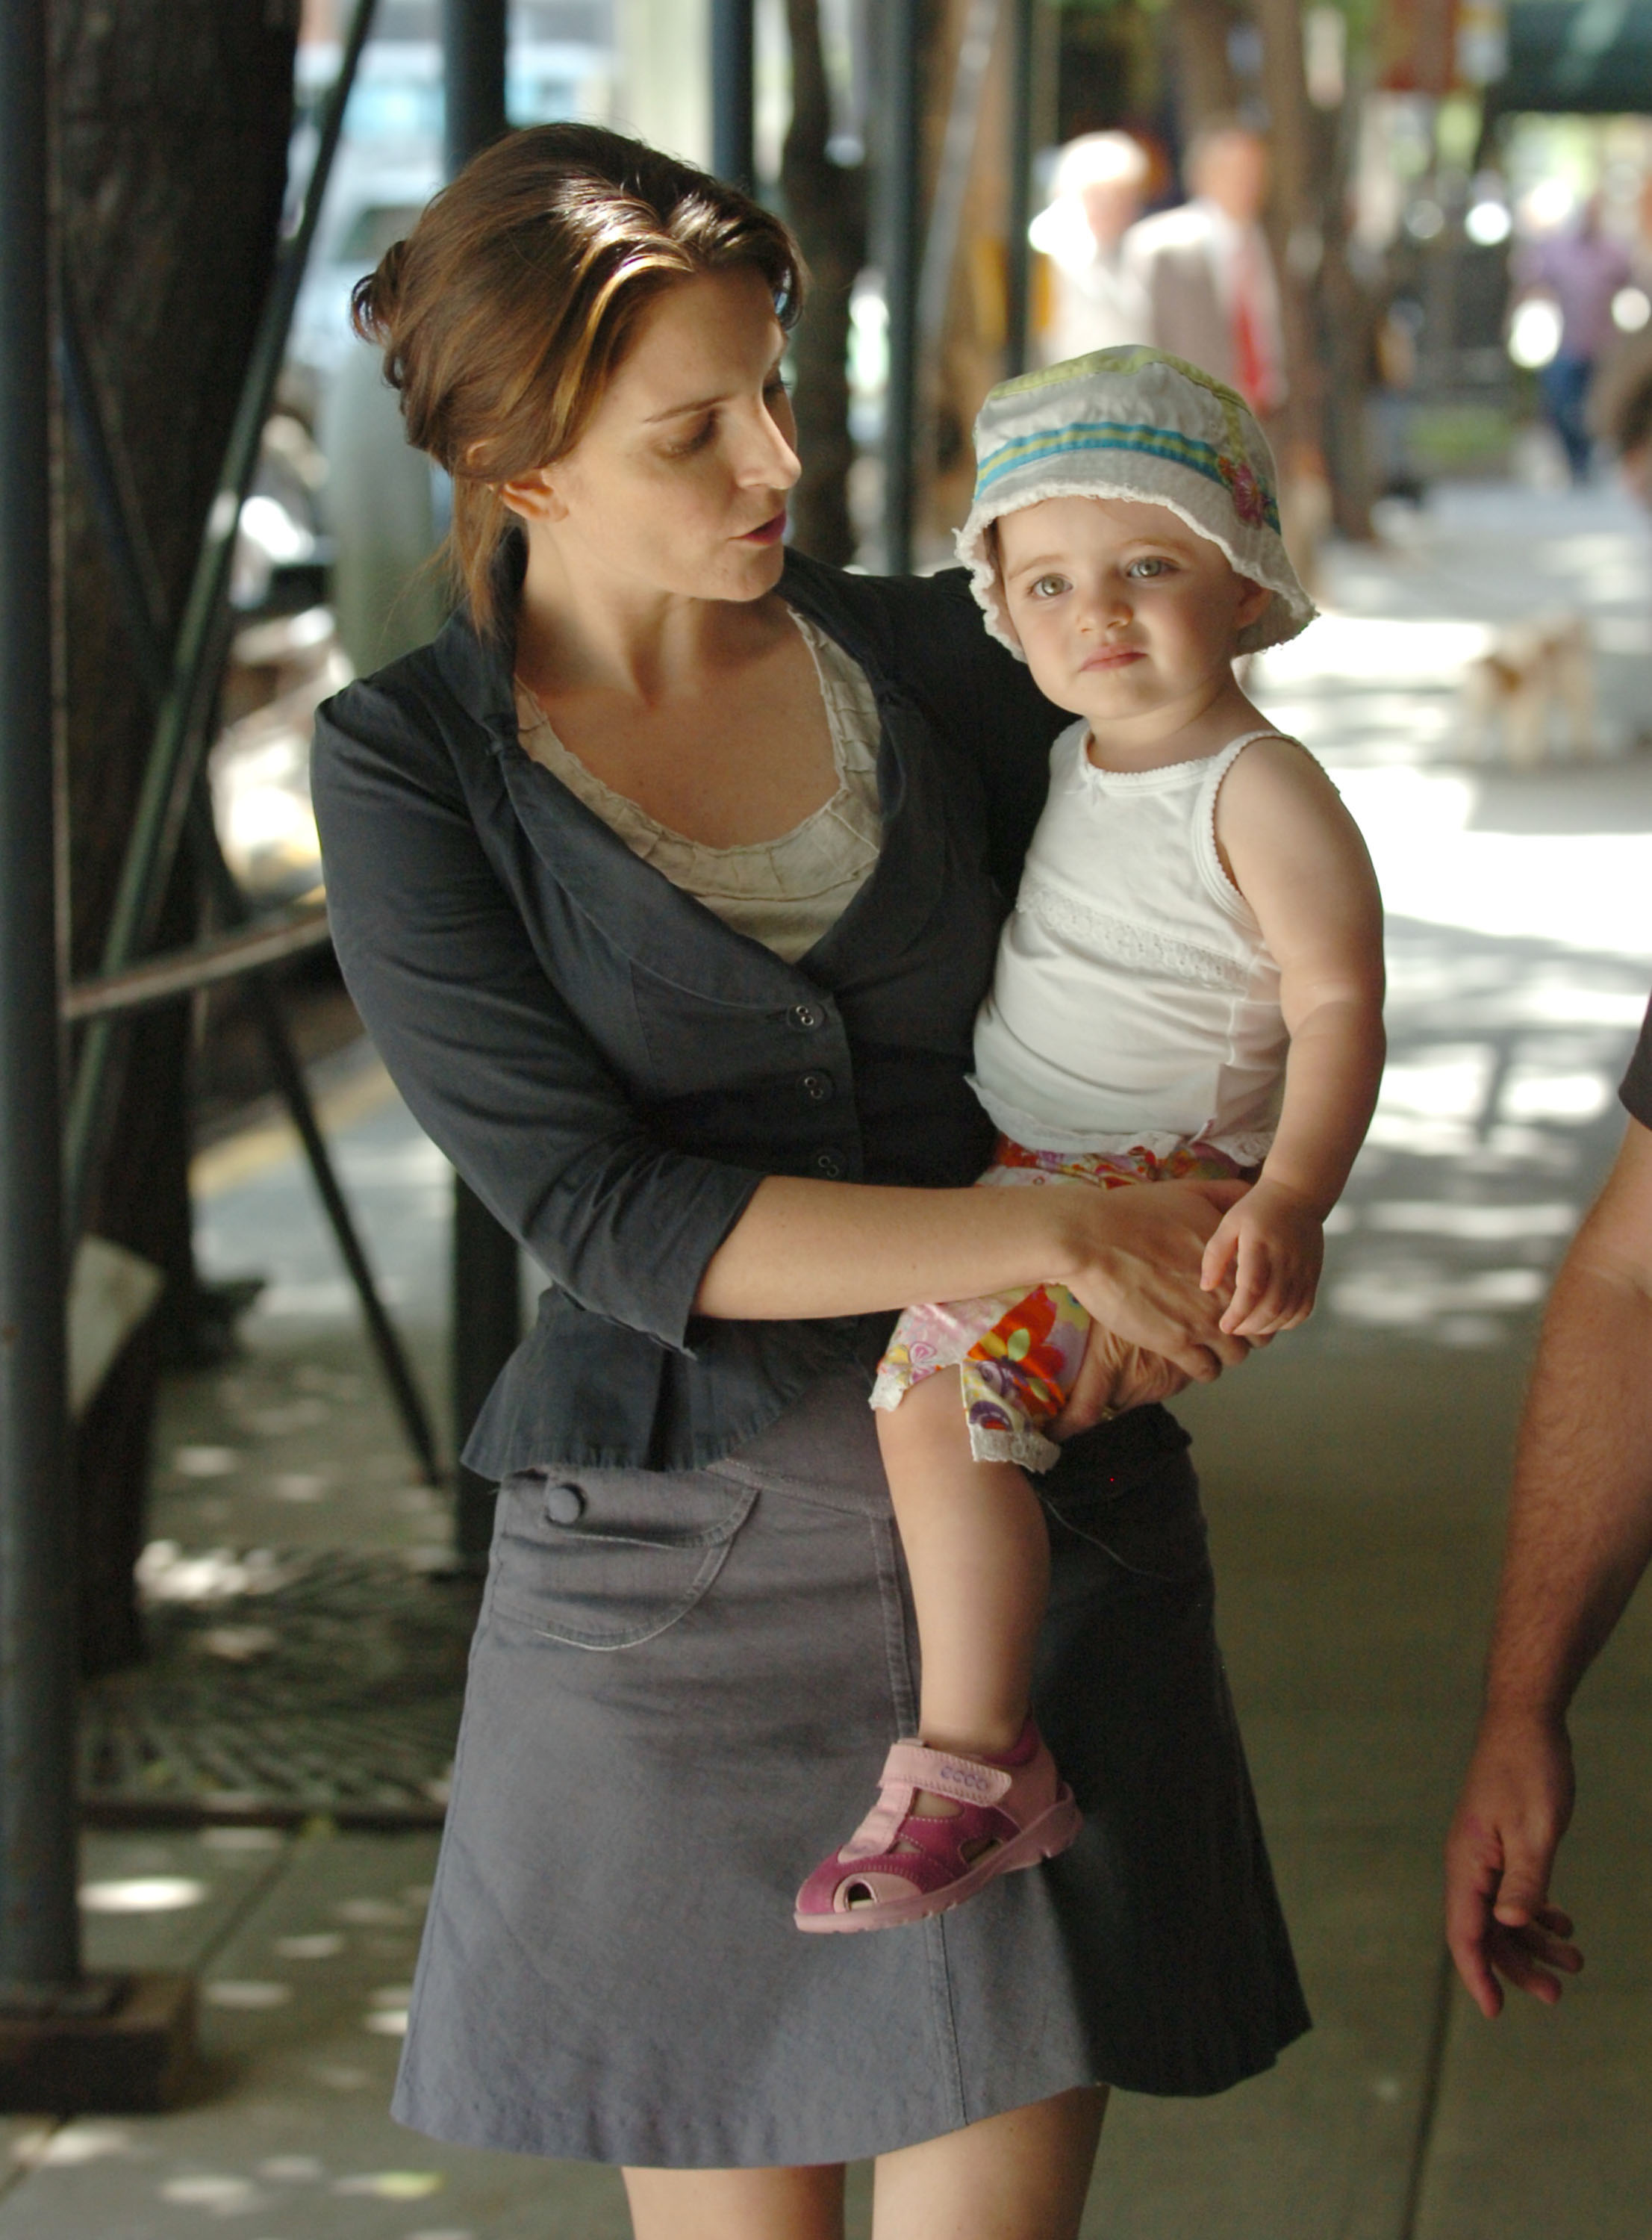 Tina Fey and her daughter Alice Zenobia Richmond pictured while filming the 2007 film "Baby Mama." | Source: Getty Images